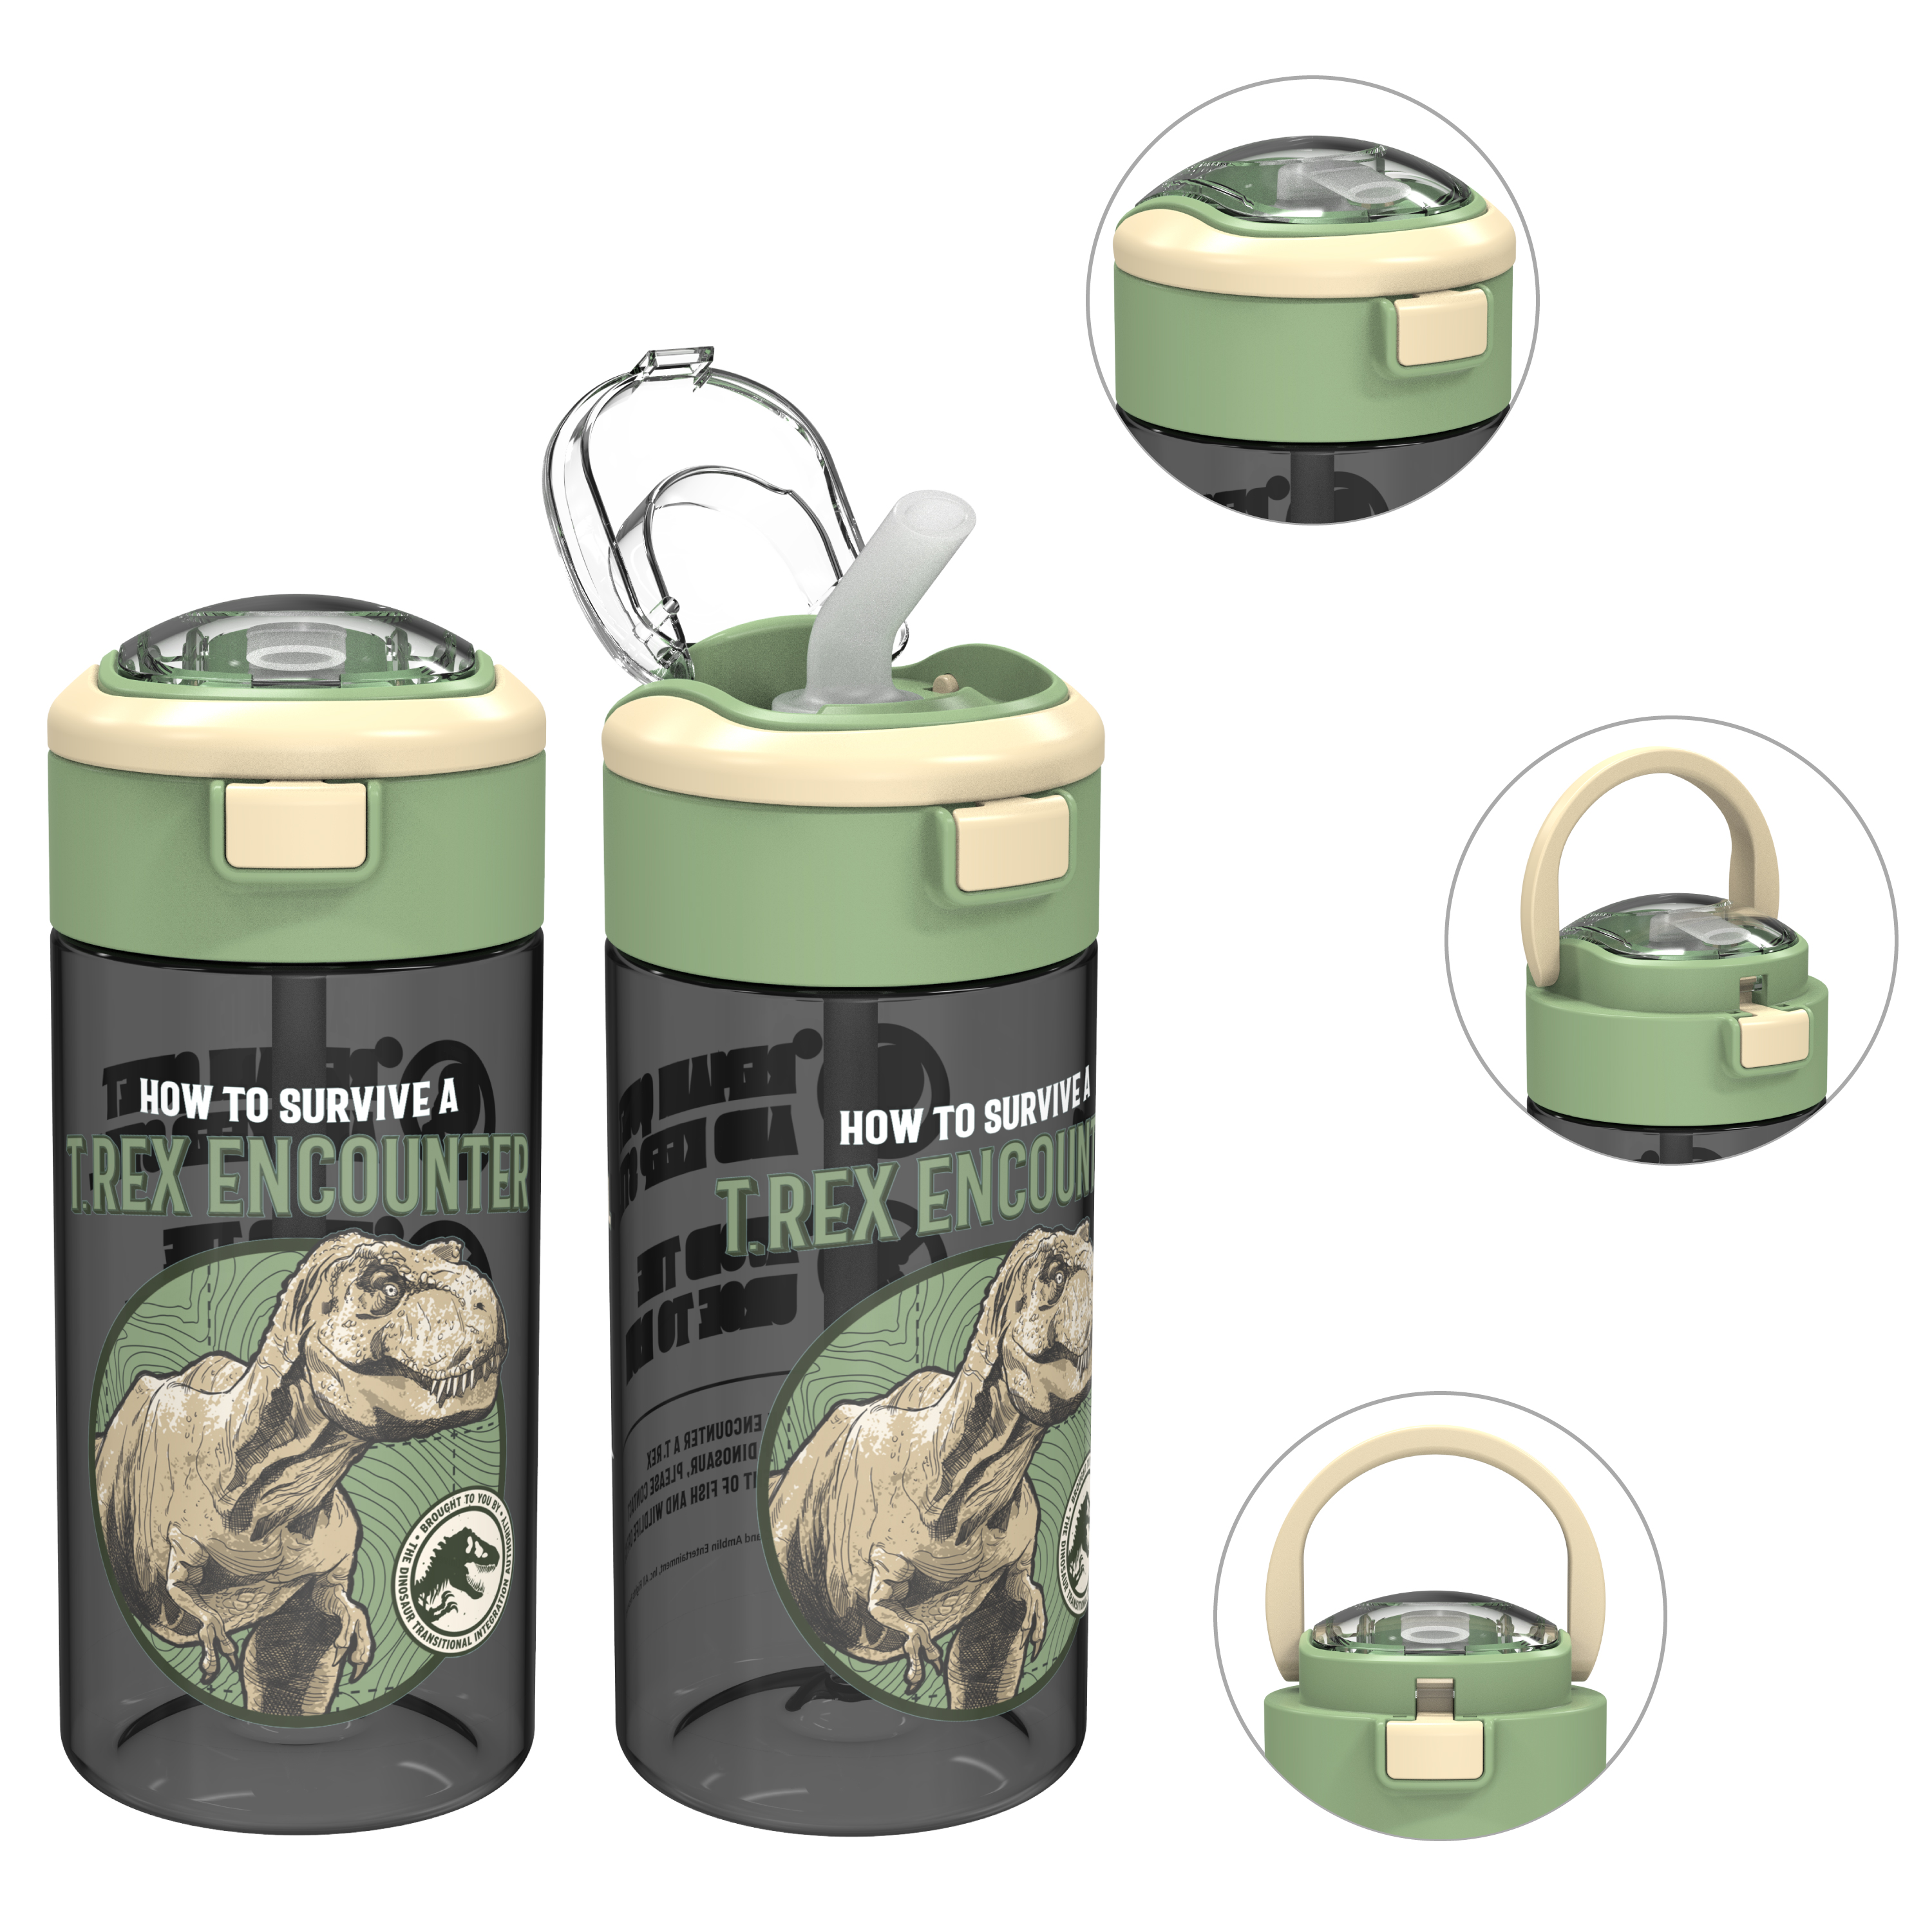 Jurassic World Dominion 18 ounce Reusable Plastic Water Bottle with Push-button lid, How to Survive a T-Rex Encounter, 2-piece set slideshow image 1